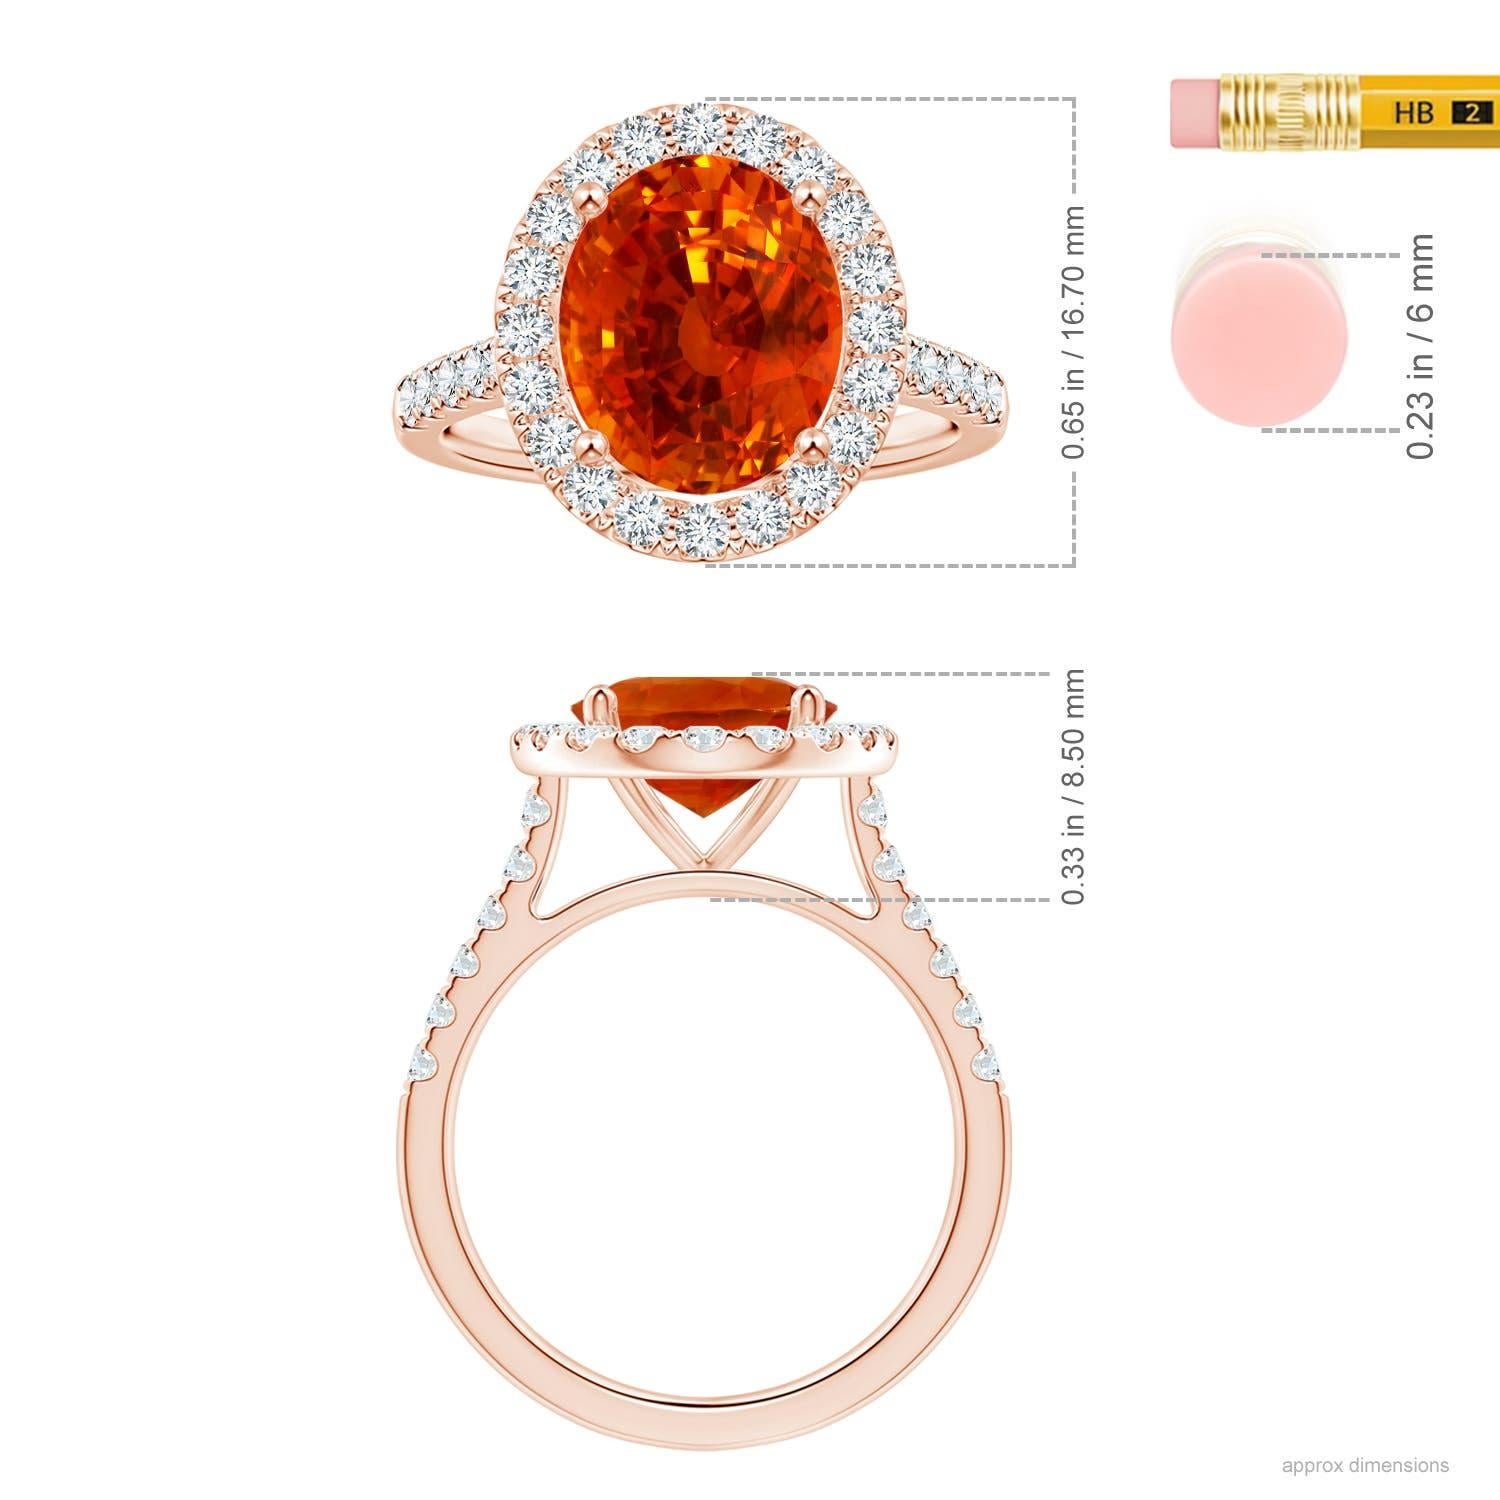 For Sale:  Angara Gia Certified Natural Orange Sapphire Diamond Halo Ring in Rose Gold 5